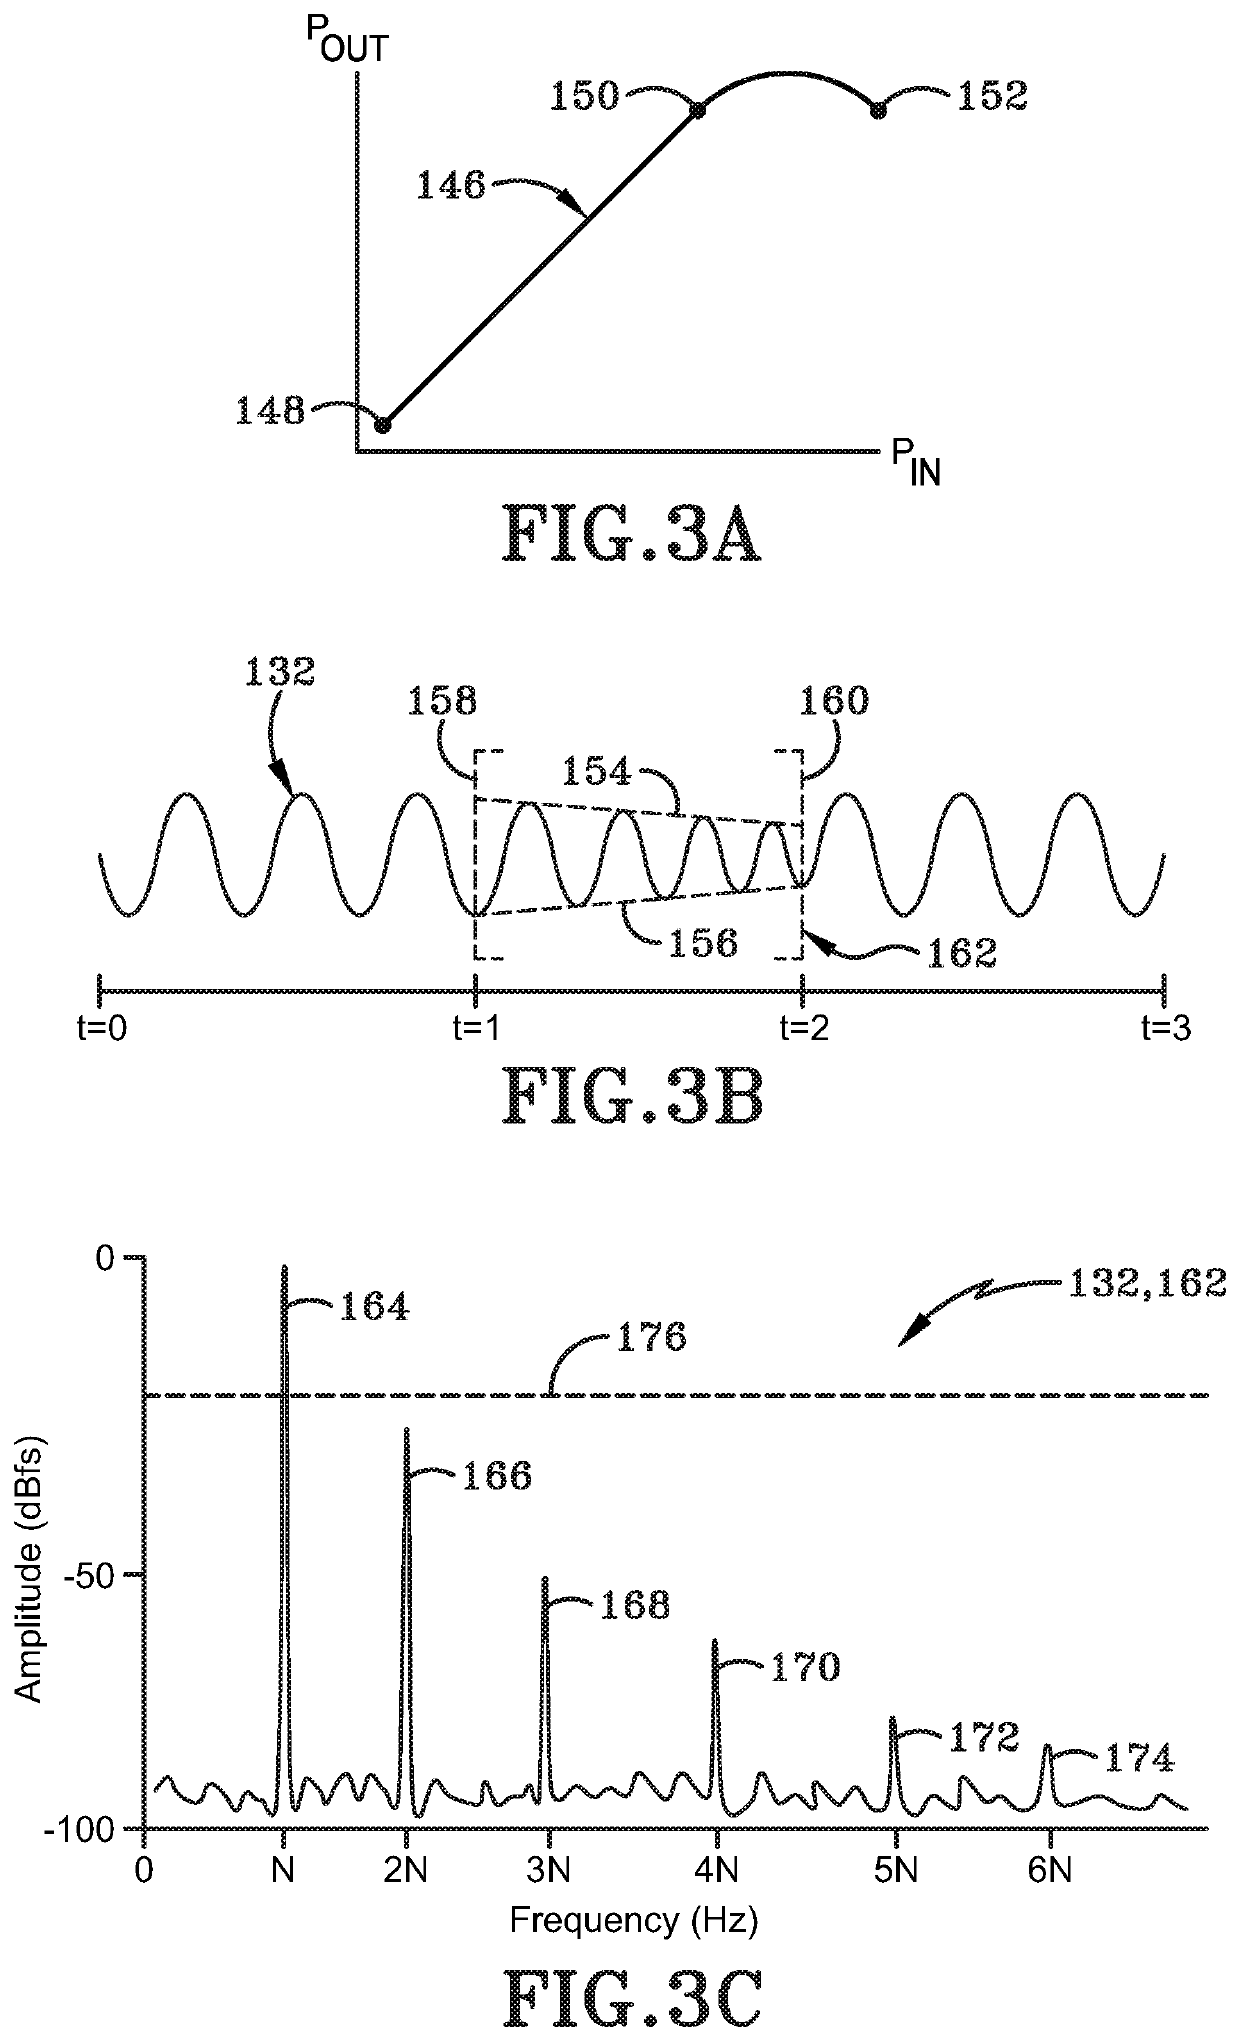 System and method for spurious signal detection and rejection